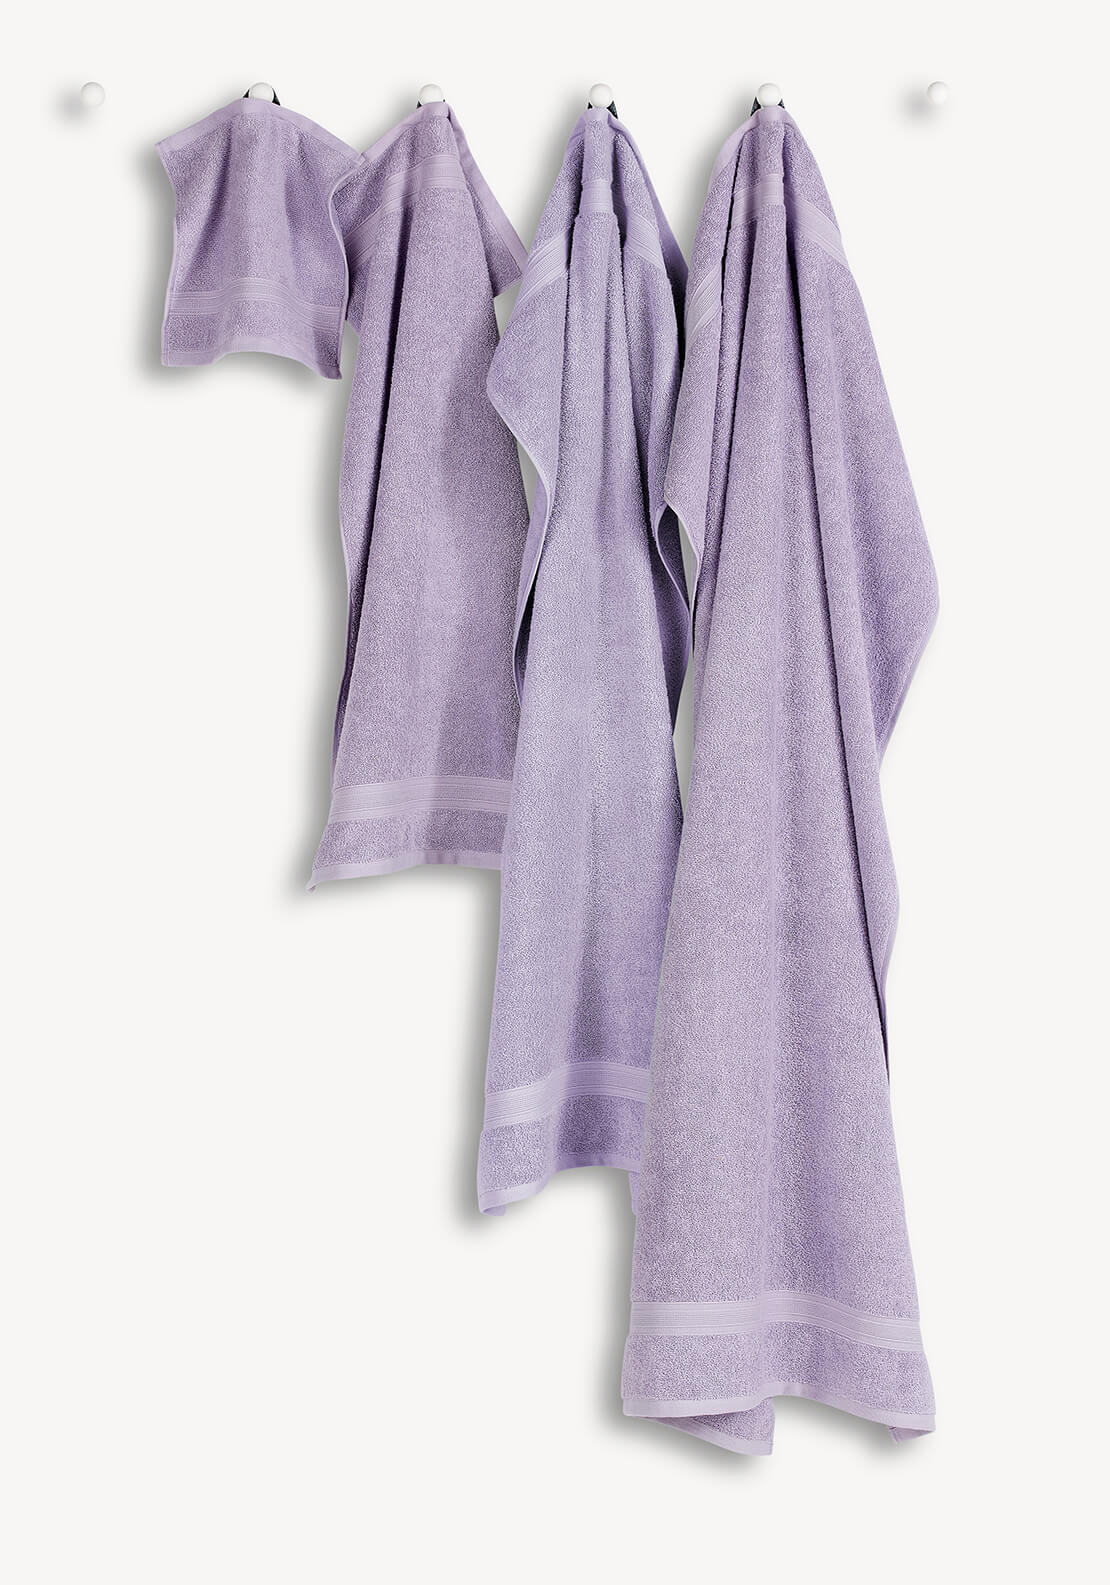 Christy Serene Hand Towel - Lilac Petal 2 Shaws Department Stores